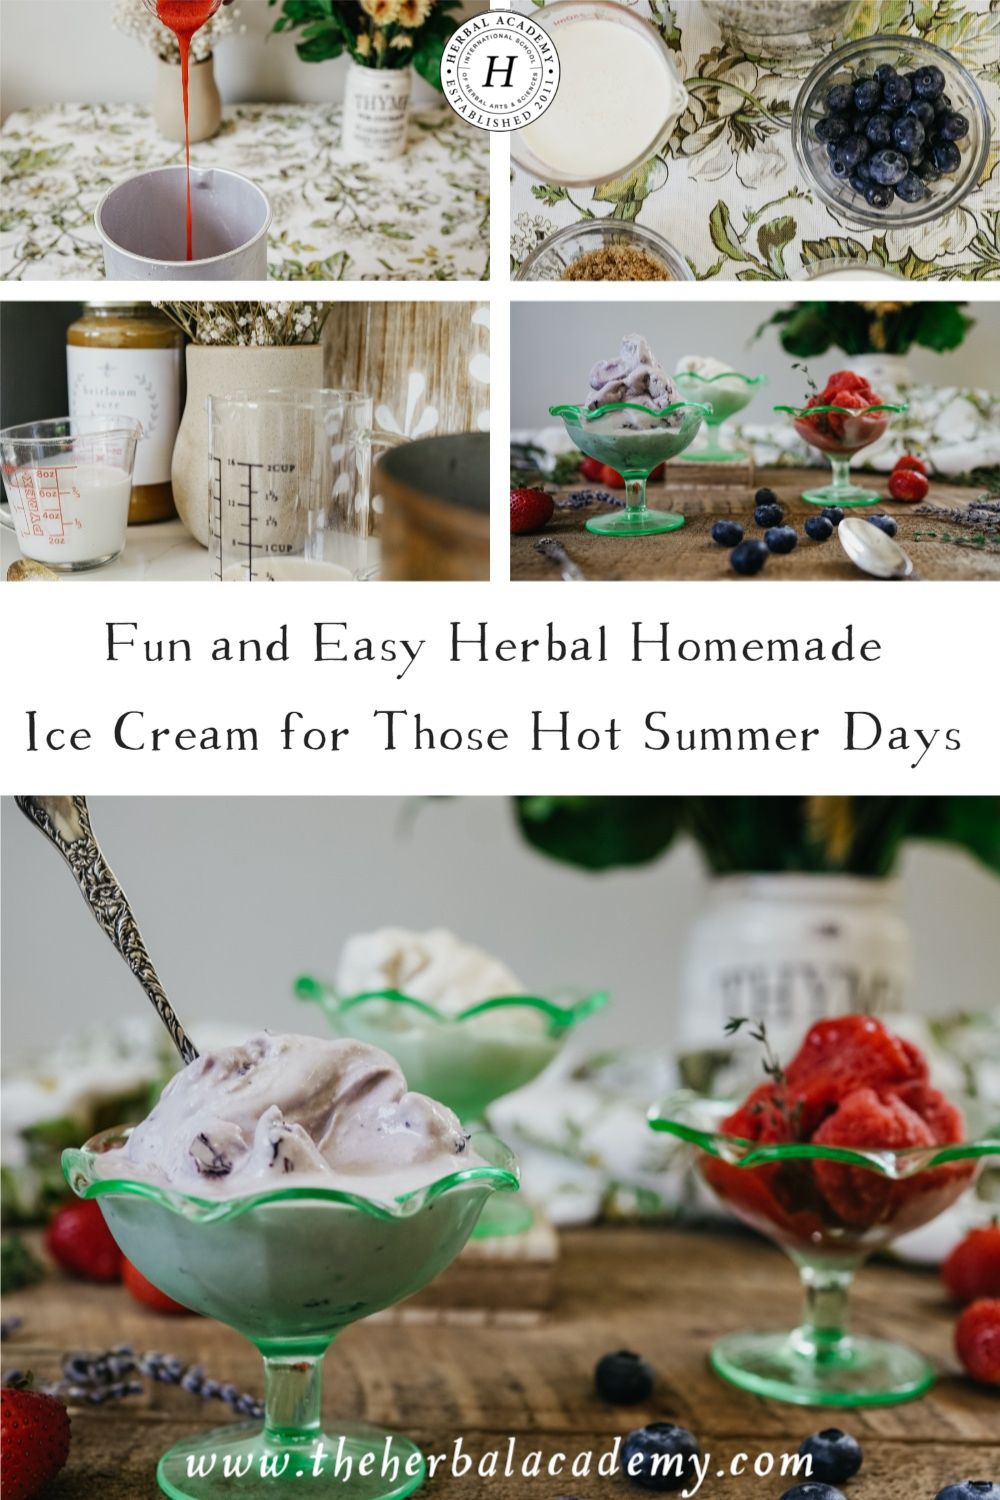 Fun and Easy Herbal Homemade Ice Cream for Those Hot Summer Days | Herbal Academy | Nothing beats homemade ice cream when it comes to sweet treats, and using herbs in your recipe is a unique way to use your plant allies.